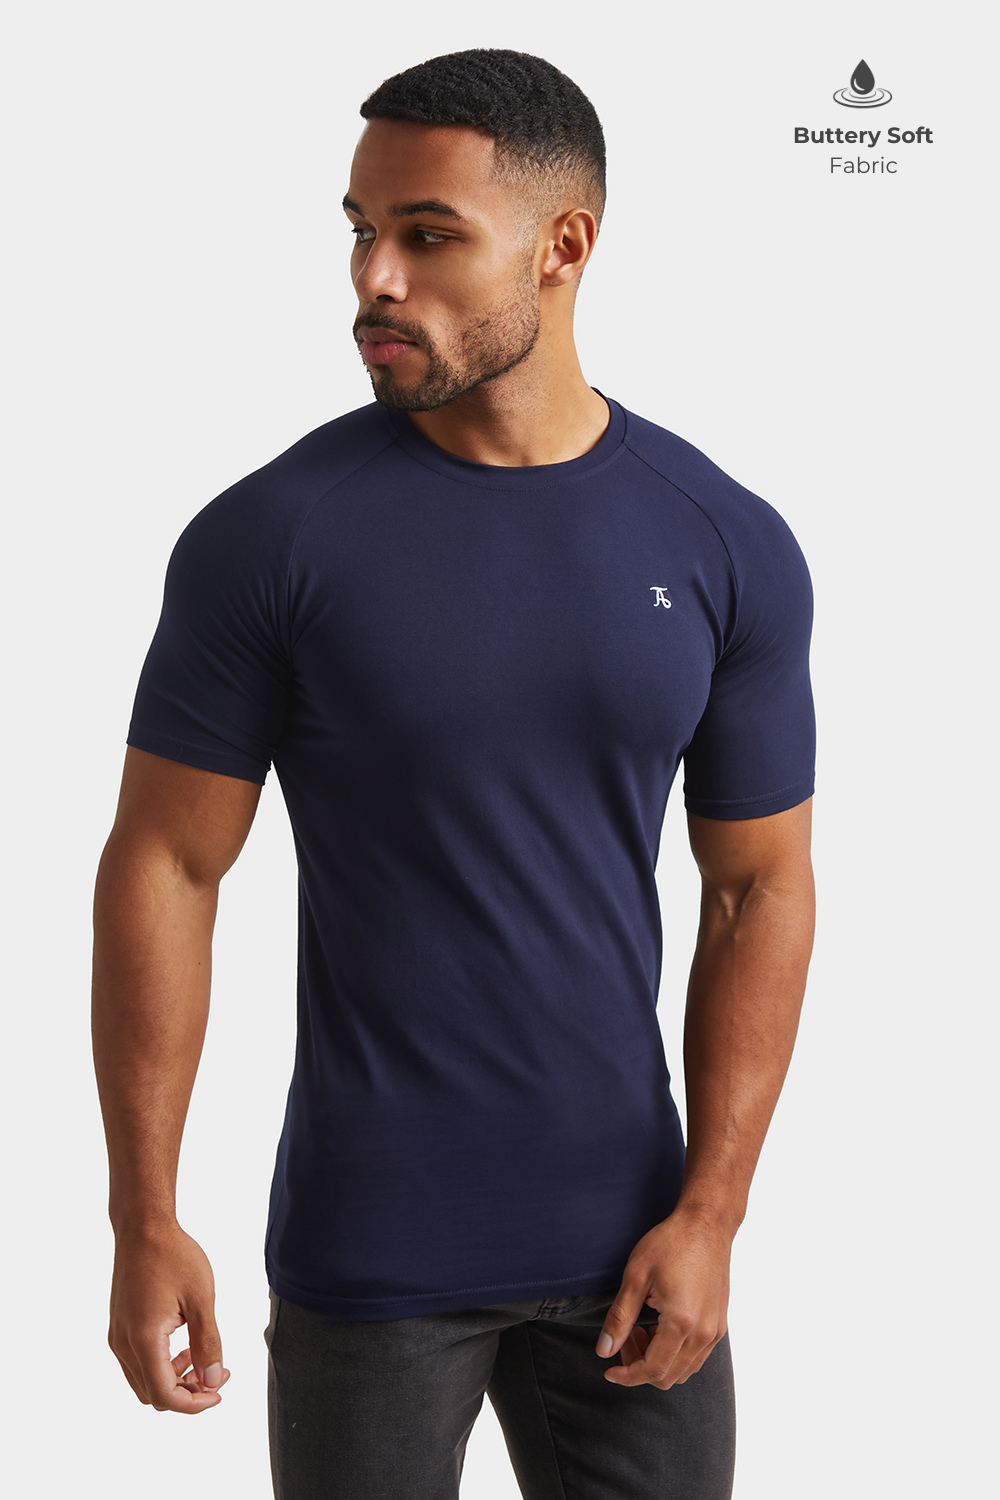 Premium Muscle Fit T-Shirt in True Navy - TAILORED ATHLETE - ROW